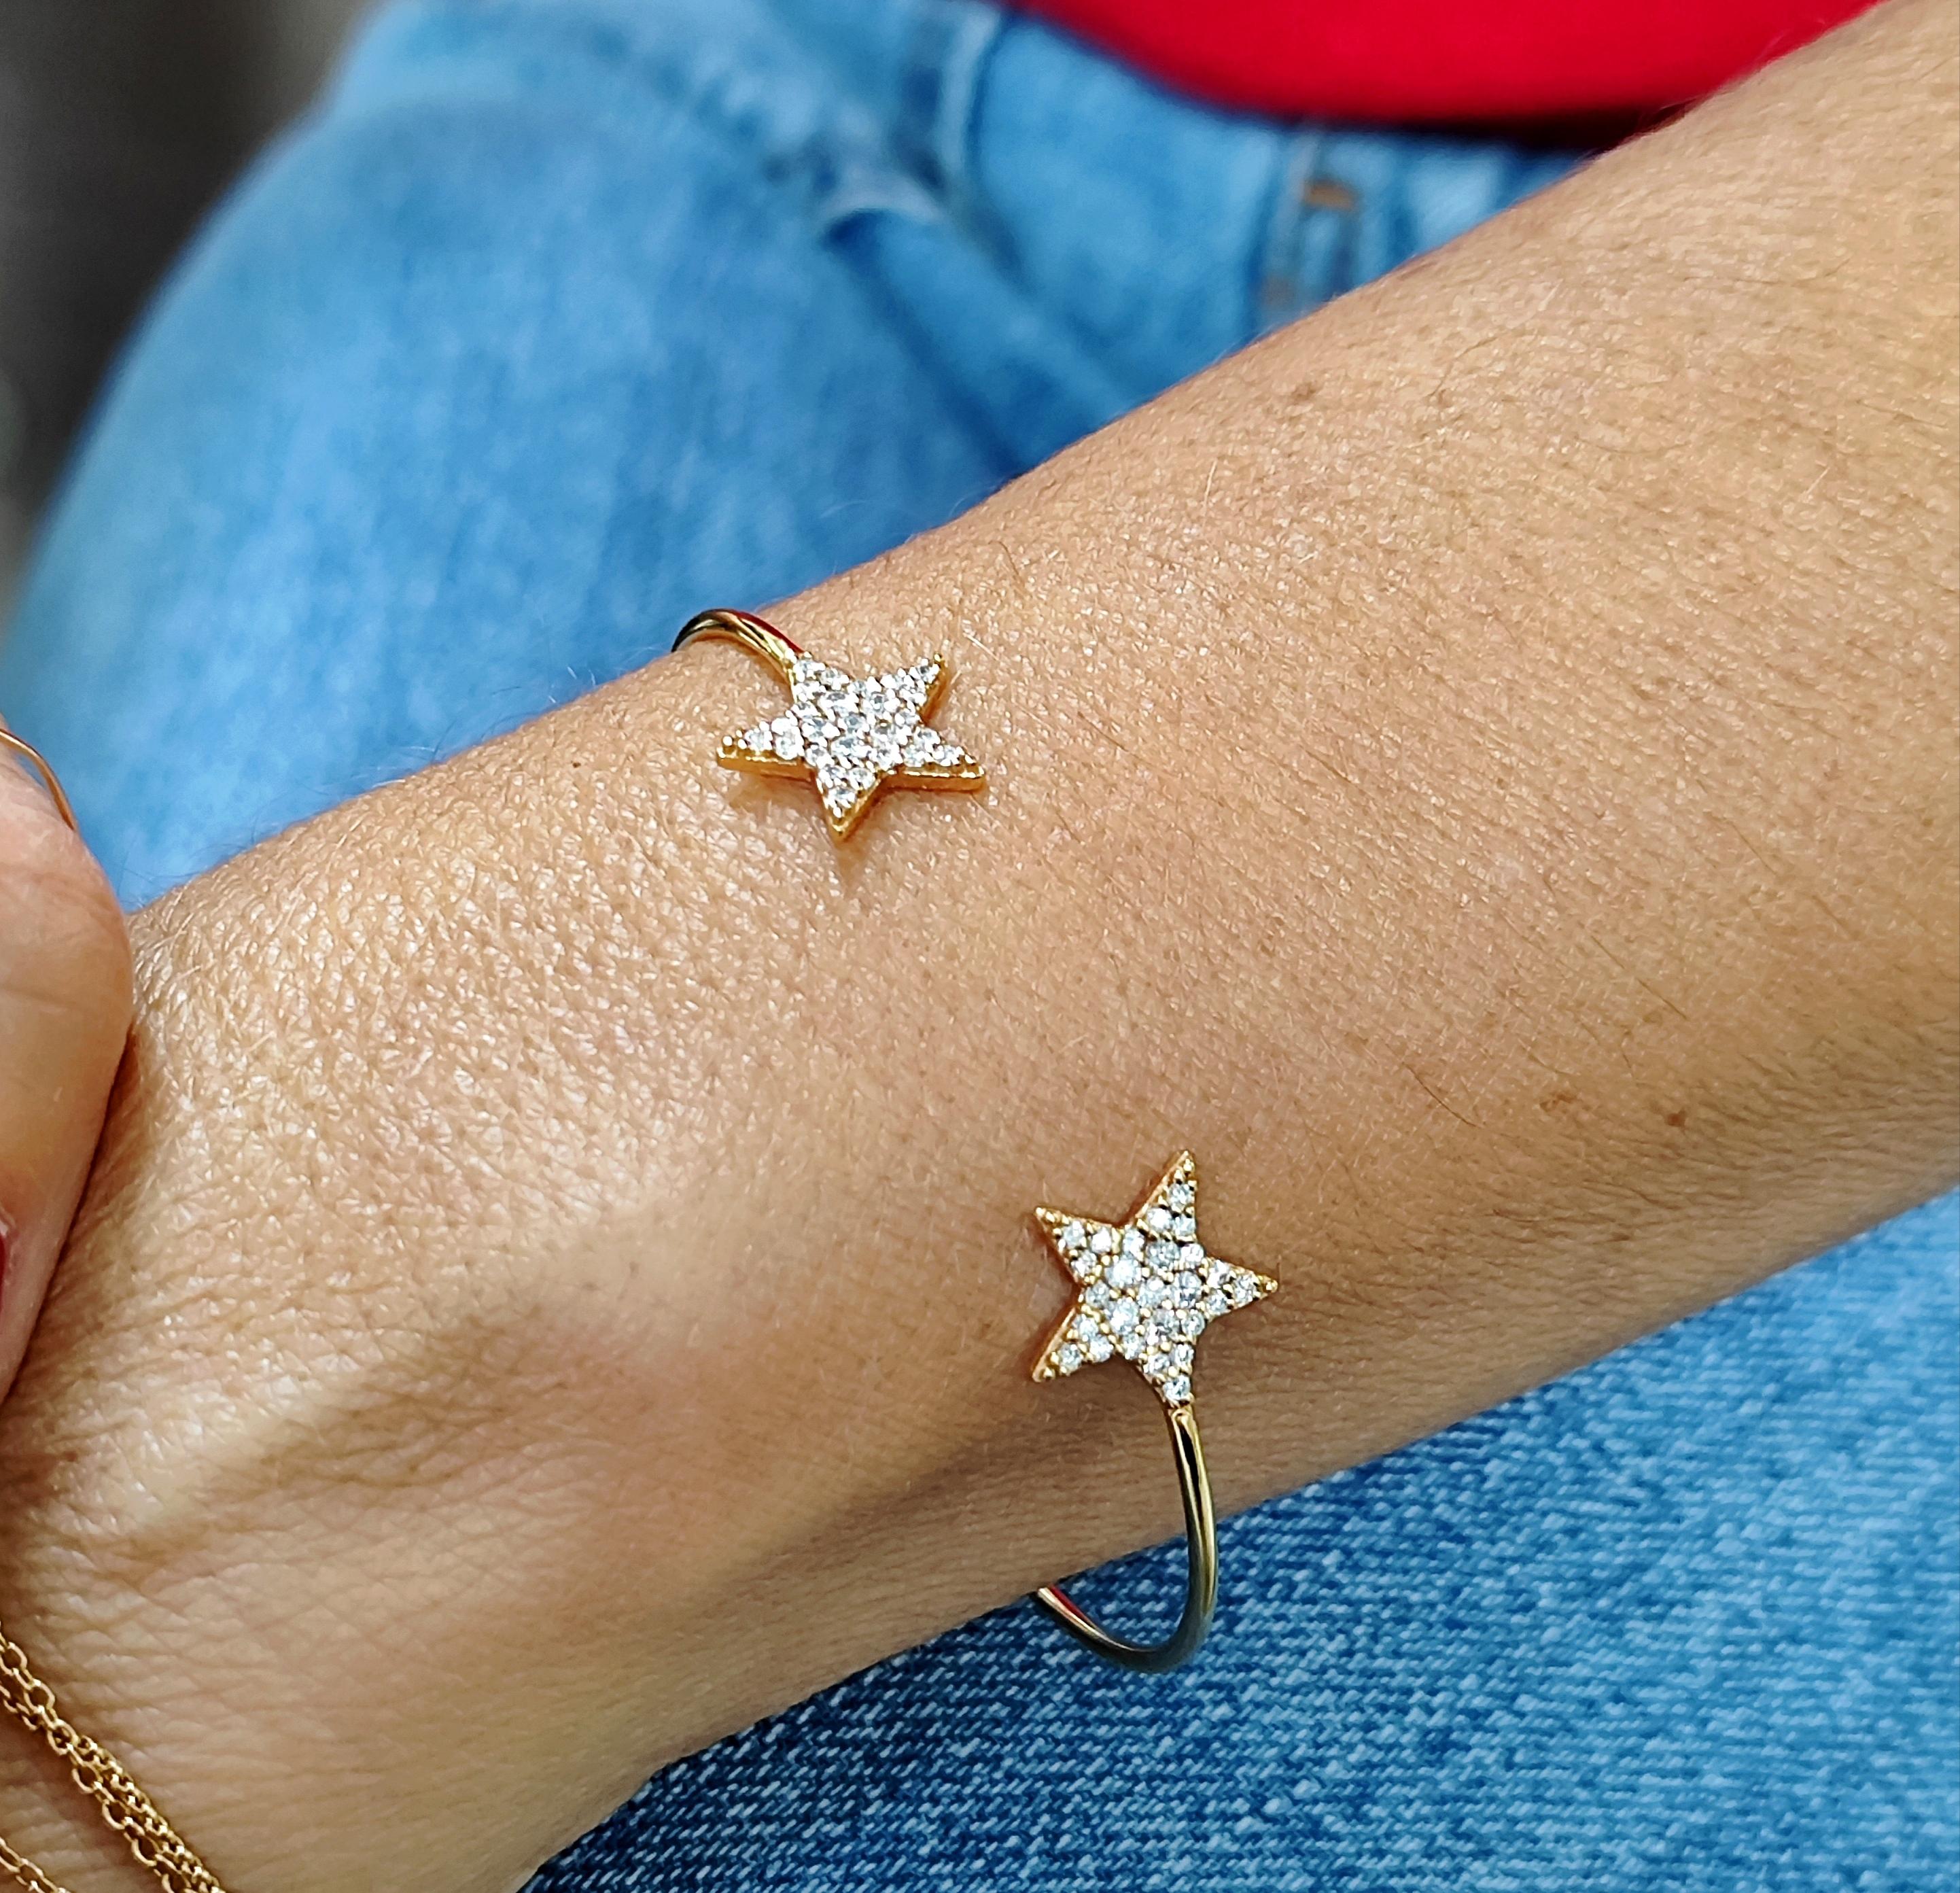 This 18KT rose gold & diamonds star cuff is easy to wear and does not need to be removed when sleeping as it is light and confortable. 
The 2 diamonds pavé stars bring preciousness to the cuff that is made of 6grams of 18kt gold 
Diamonds are known